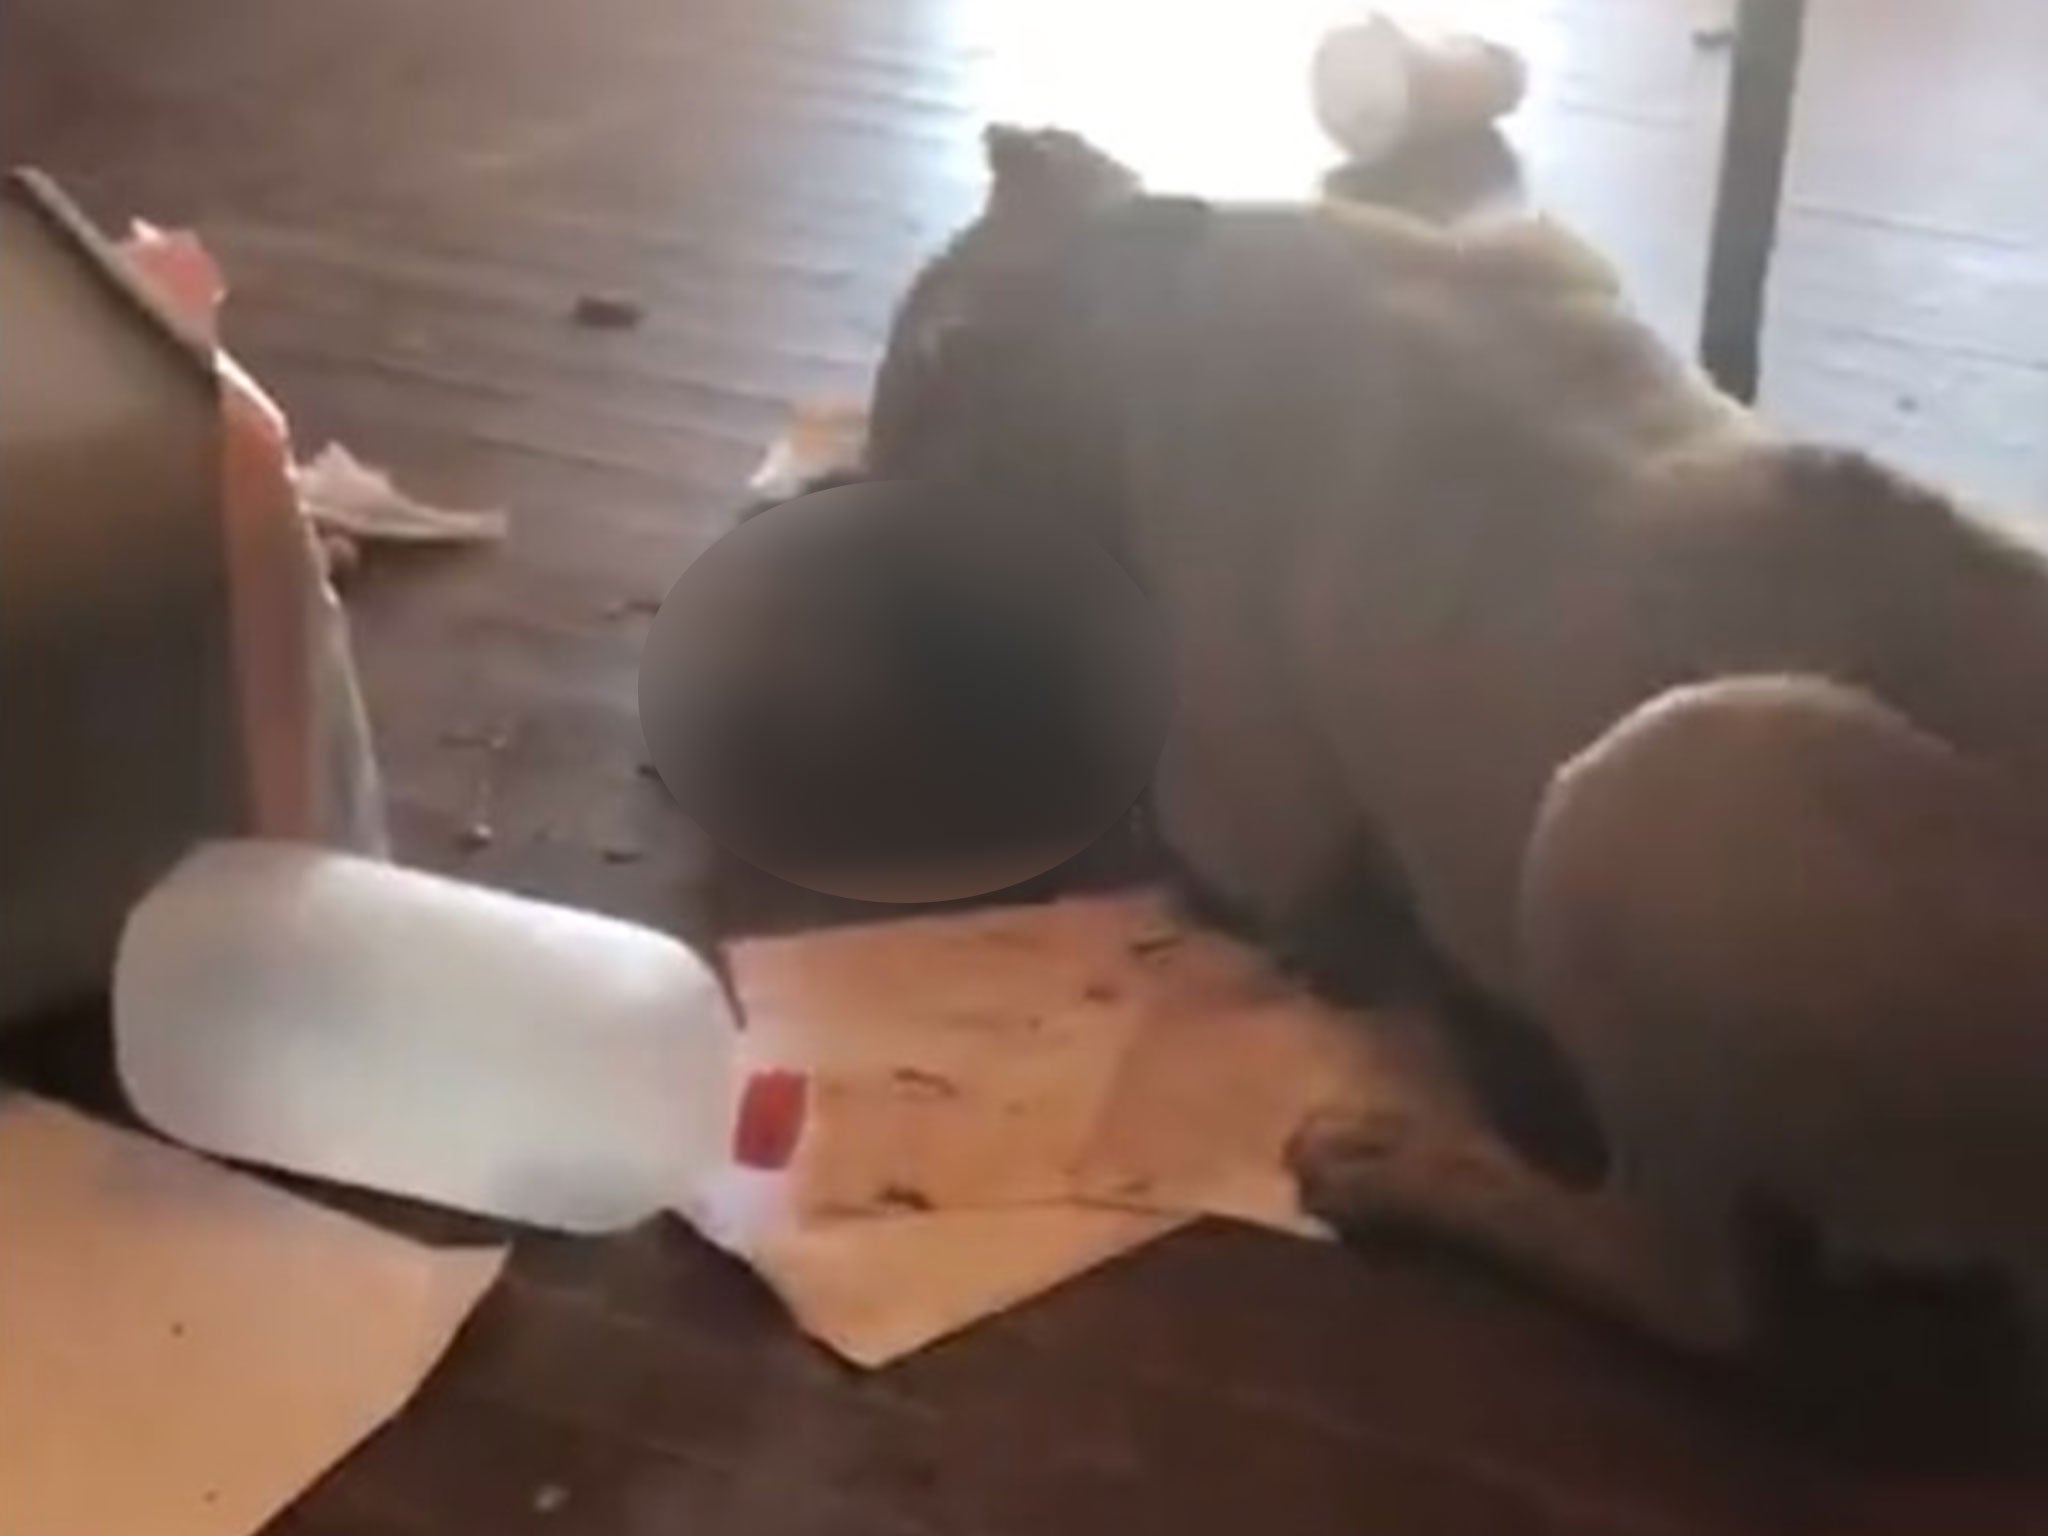 The owner's video shows the dog eating her cat